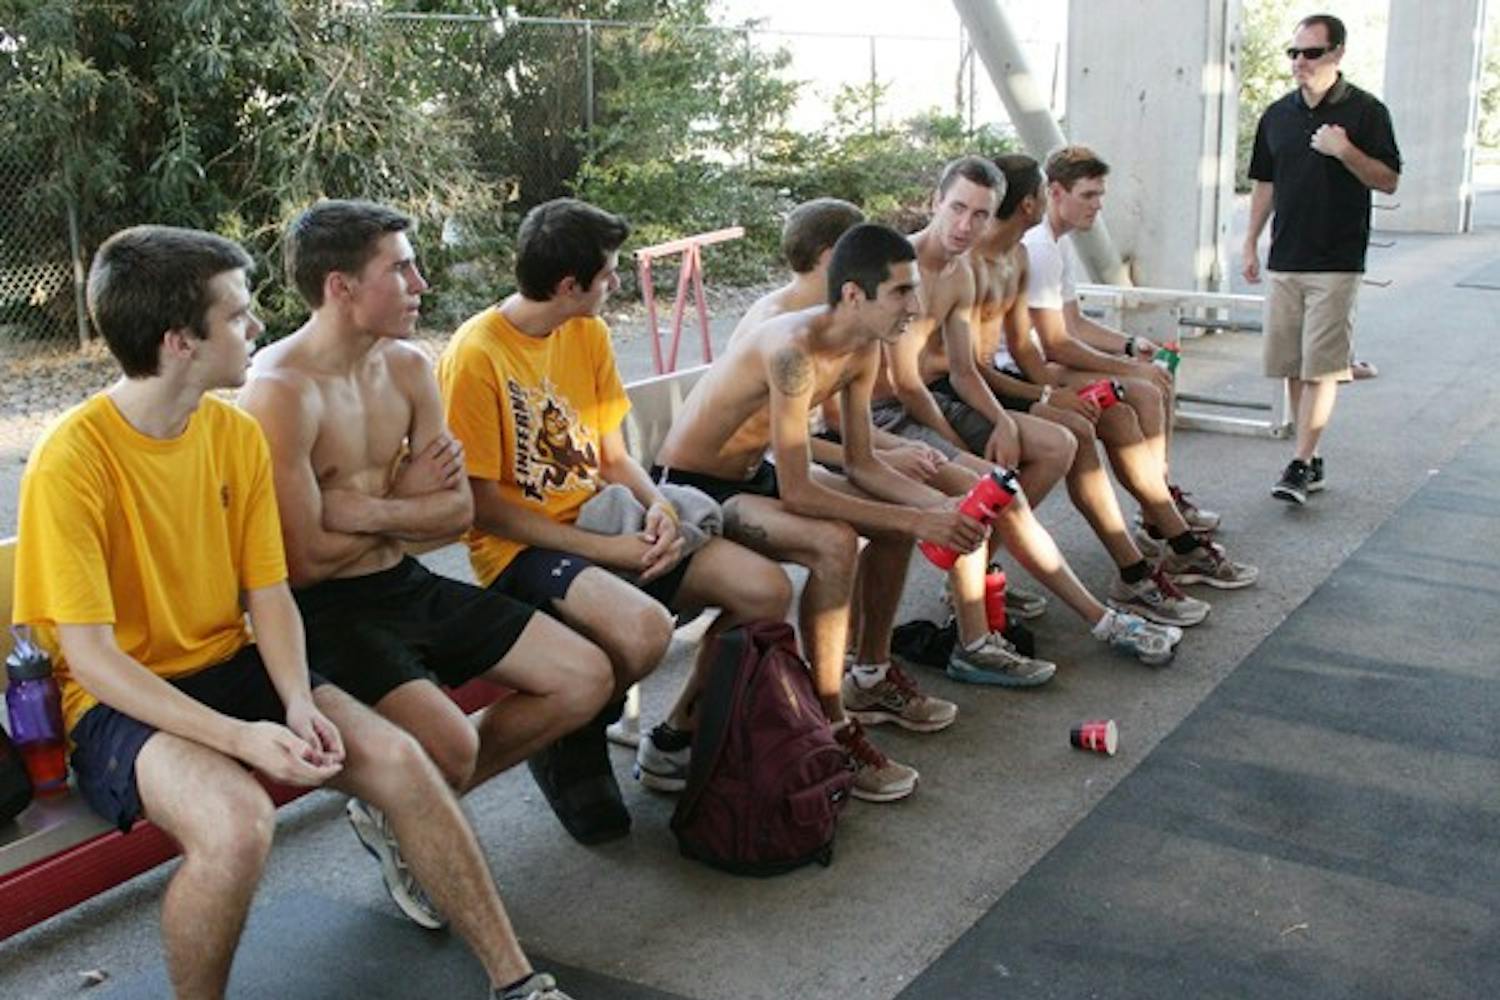 HIGH FINISH: Members of the ASU men’s cross-country team rest after a practice run earlier this month. The team finished fourth at the Roy Griak Invitational, while the women finished second. (Photo by Beth Easterbrook)